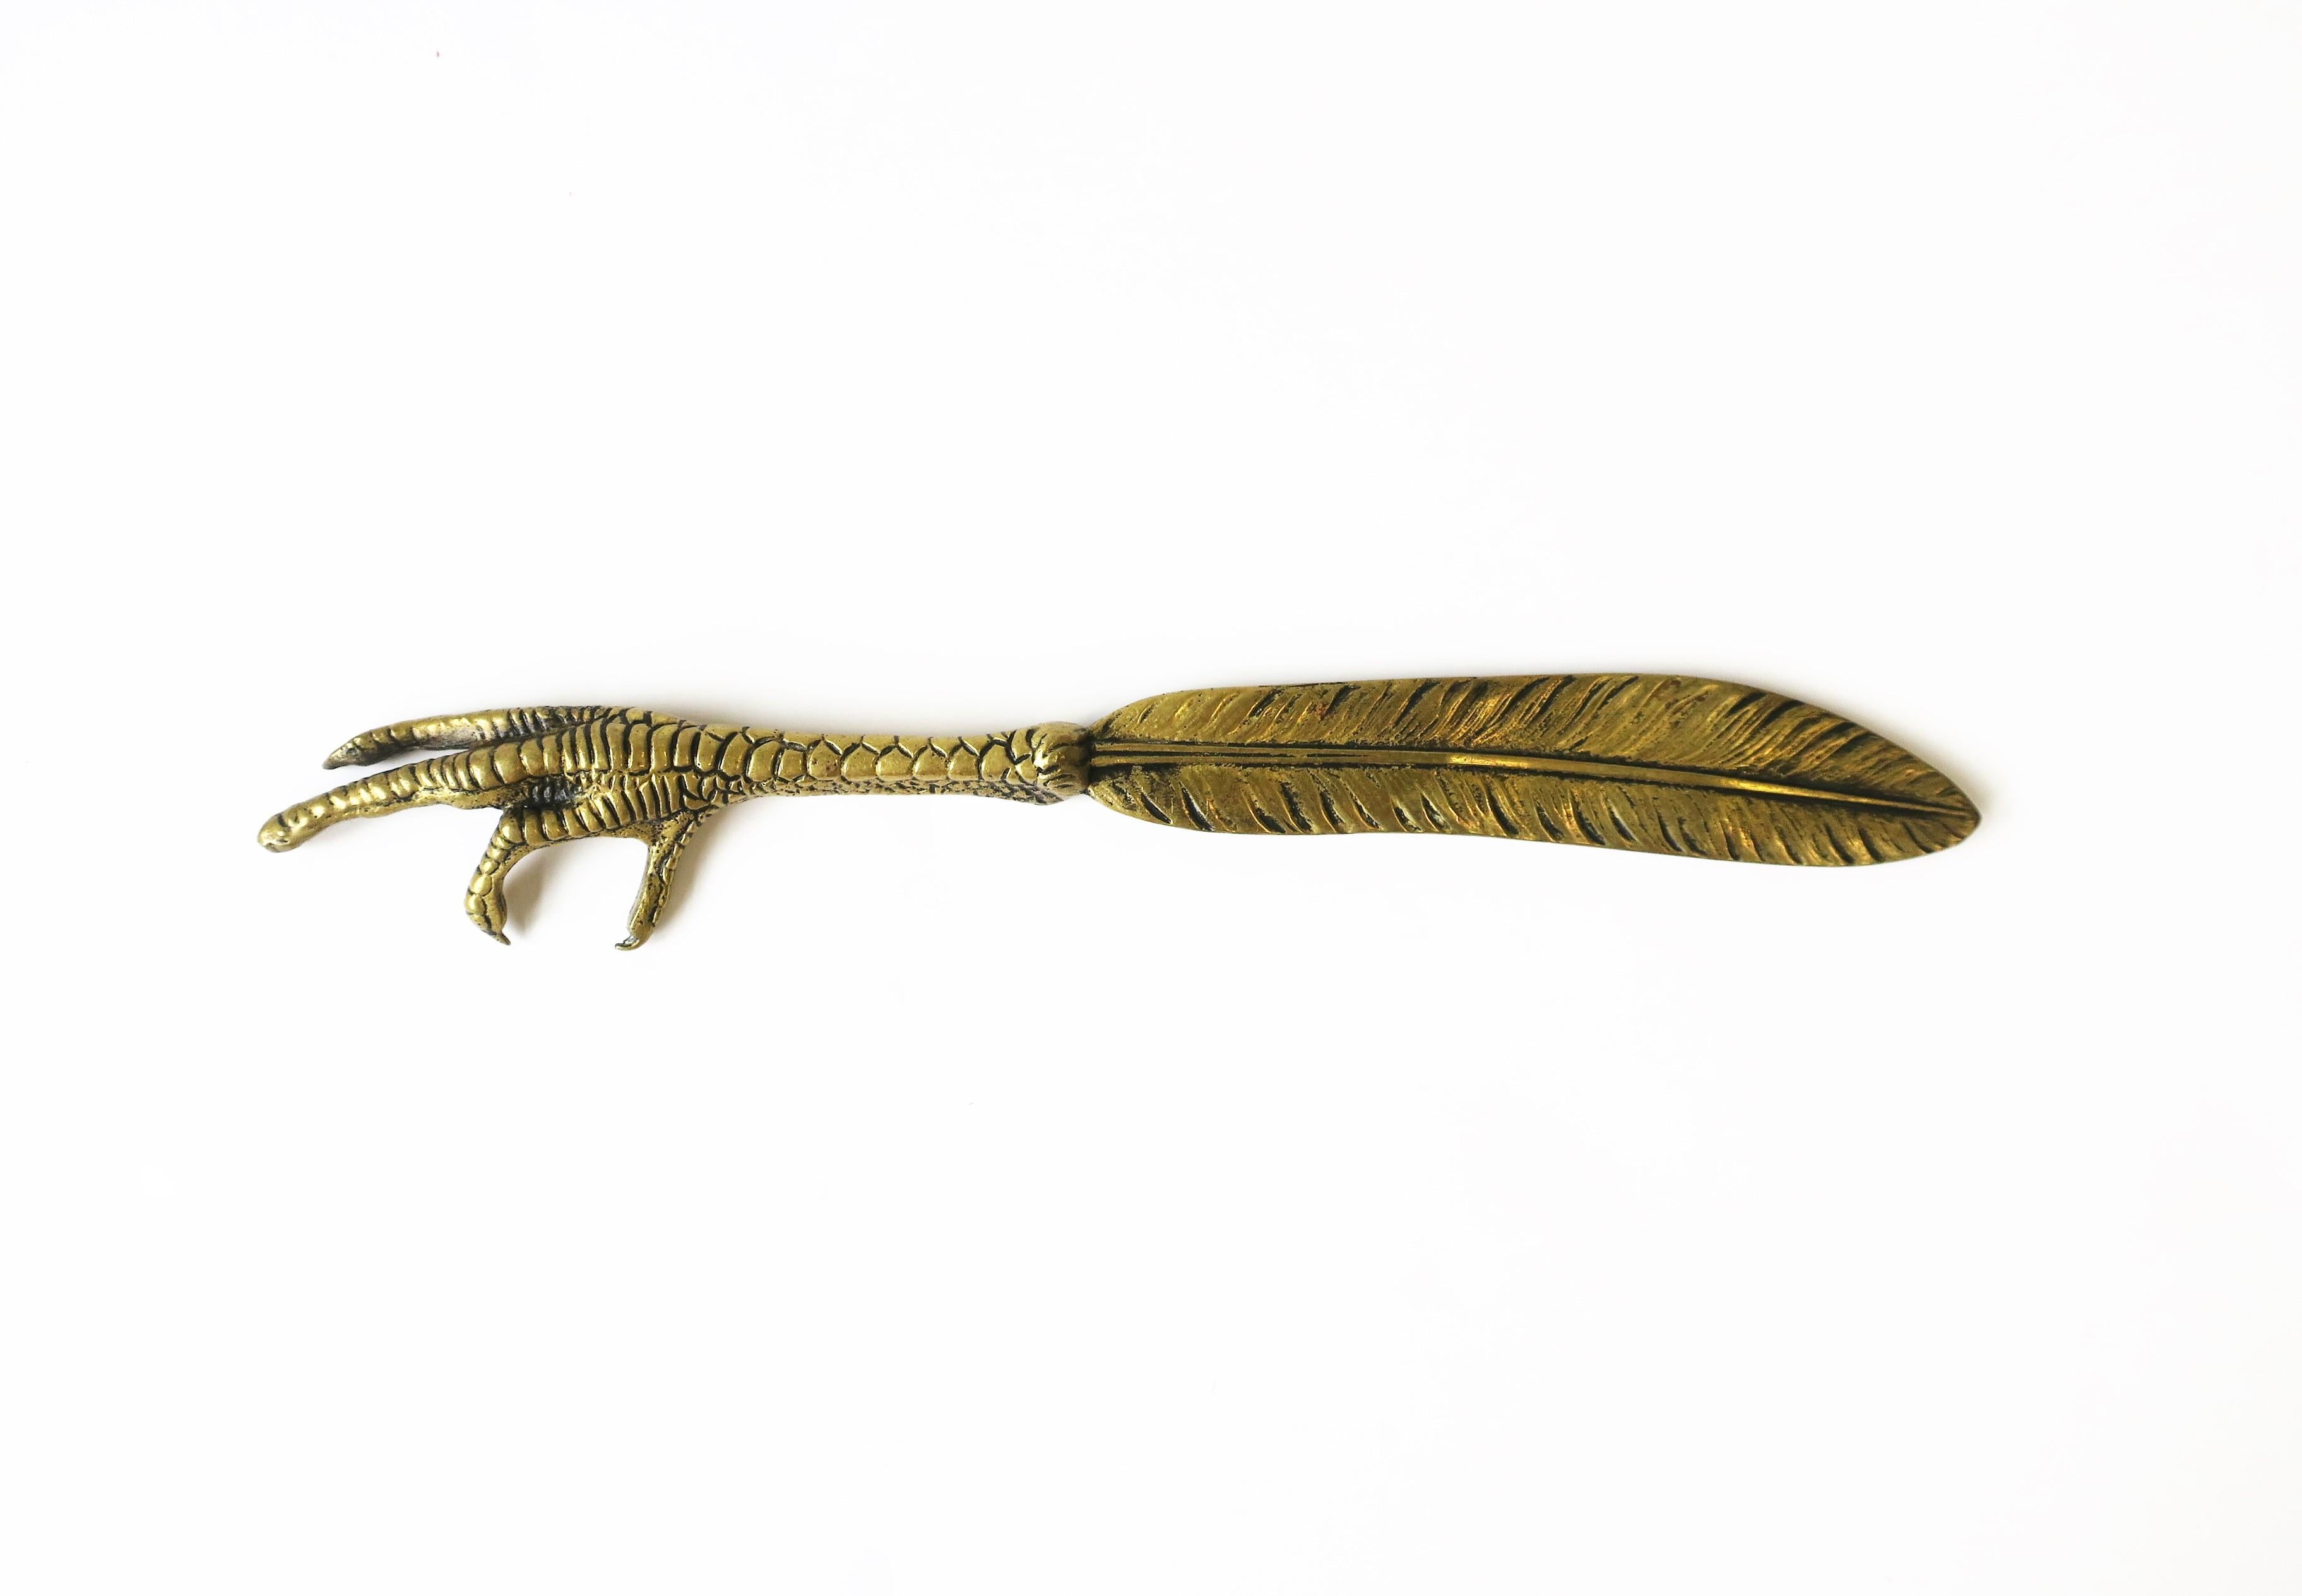 A gold brass bird claw and feather letter opener. A great desk accessory. Dimensions: 1.5